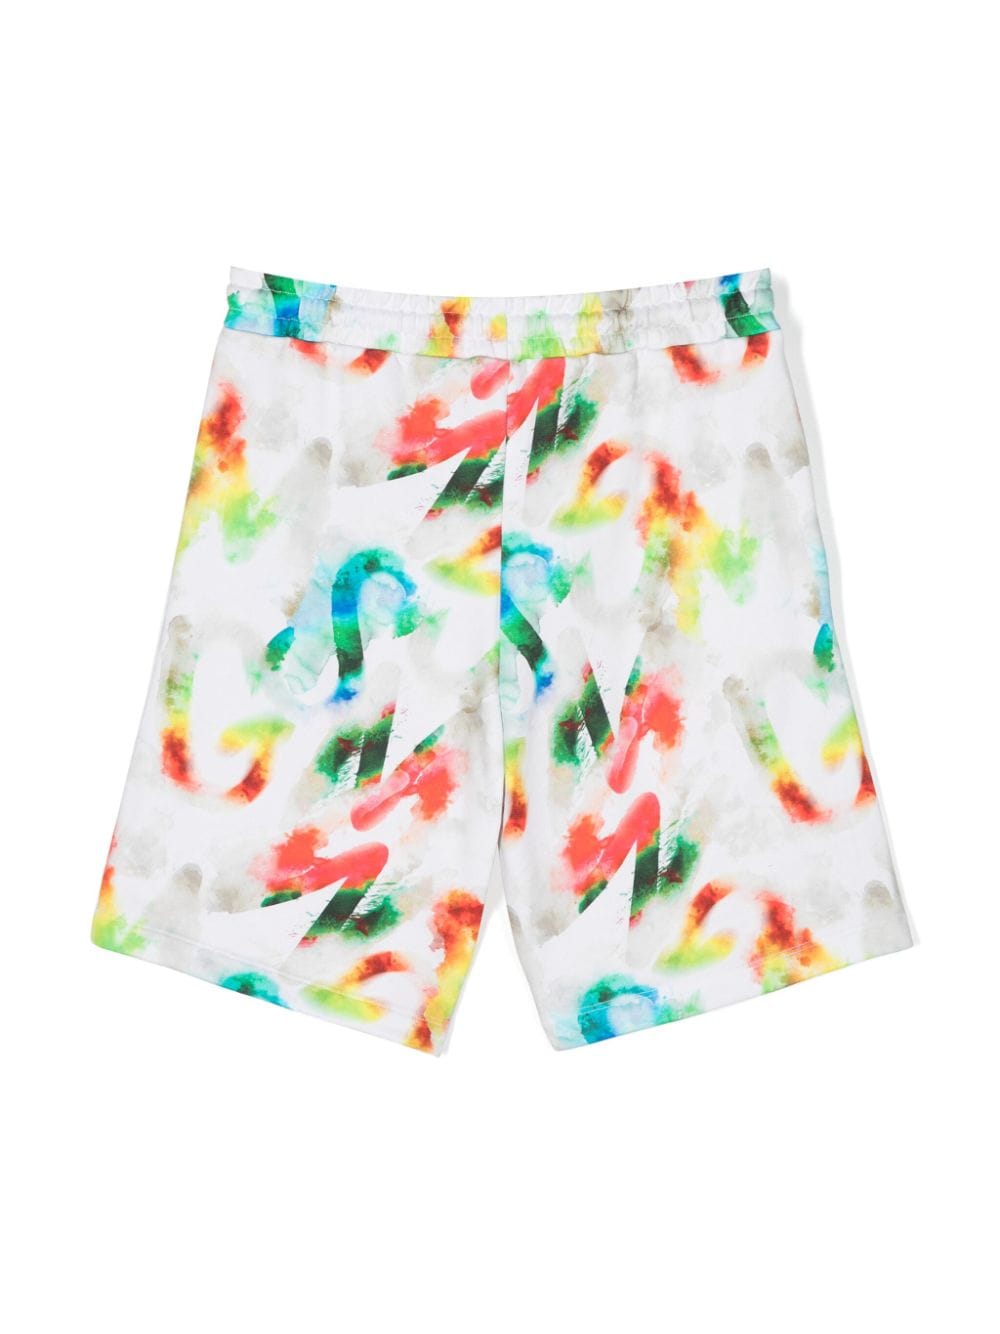 White Bermuda shorts for boys with watercolor effect